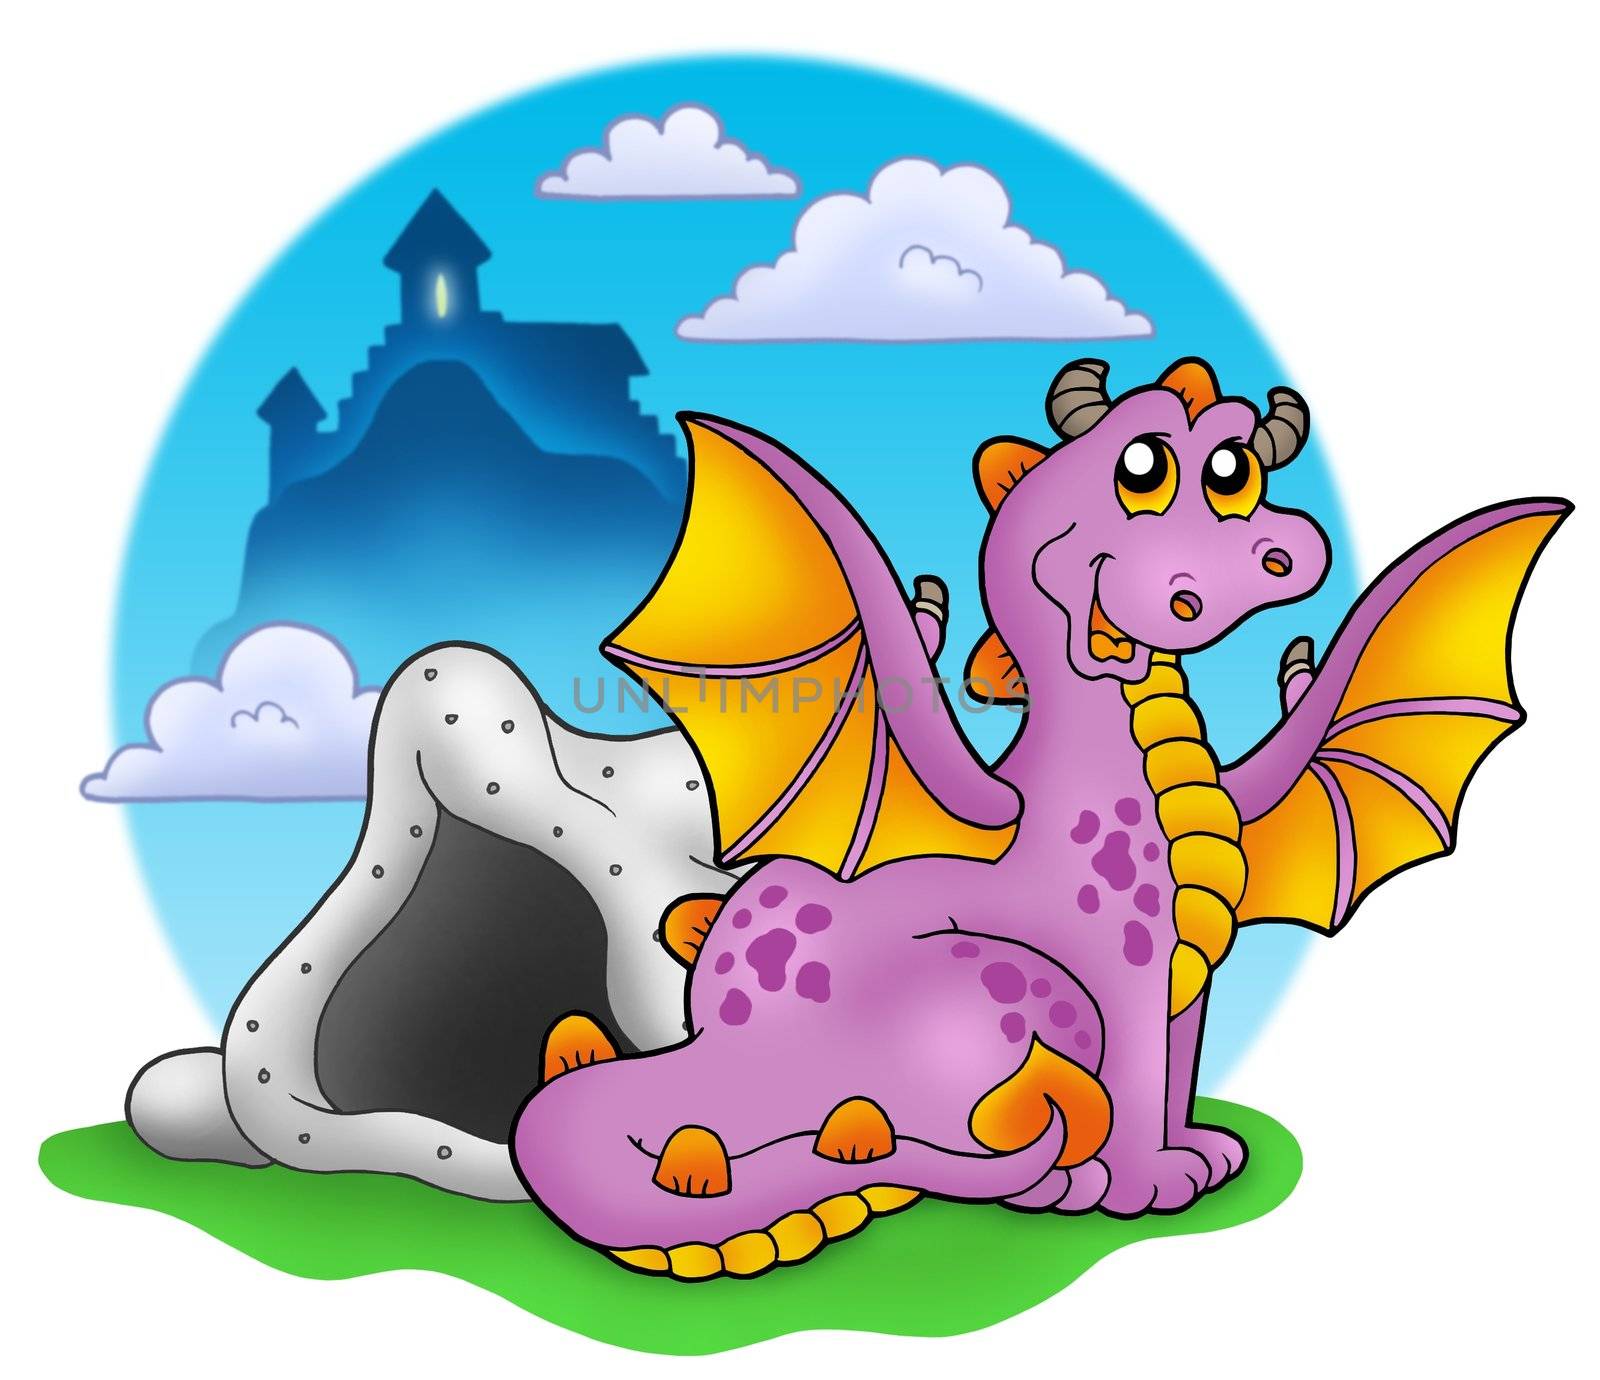 Dragon with cave and castle 2 - color illustration.